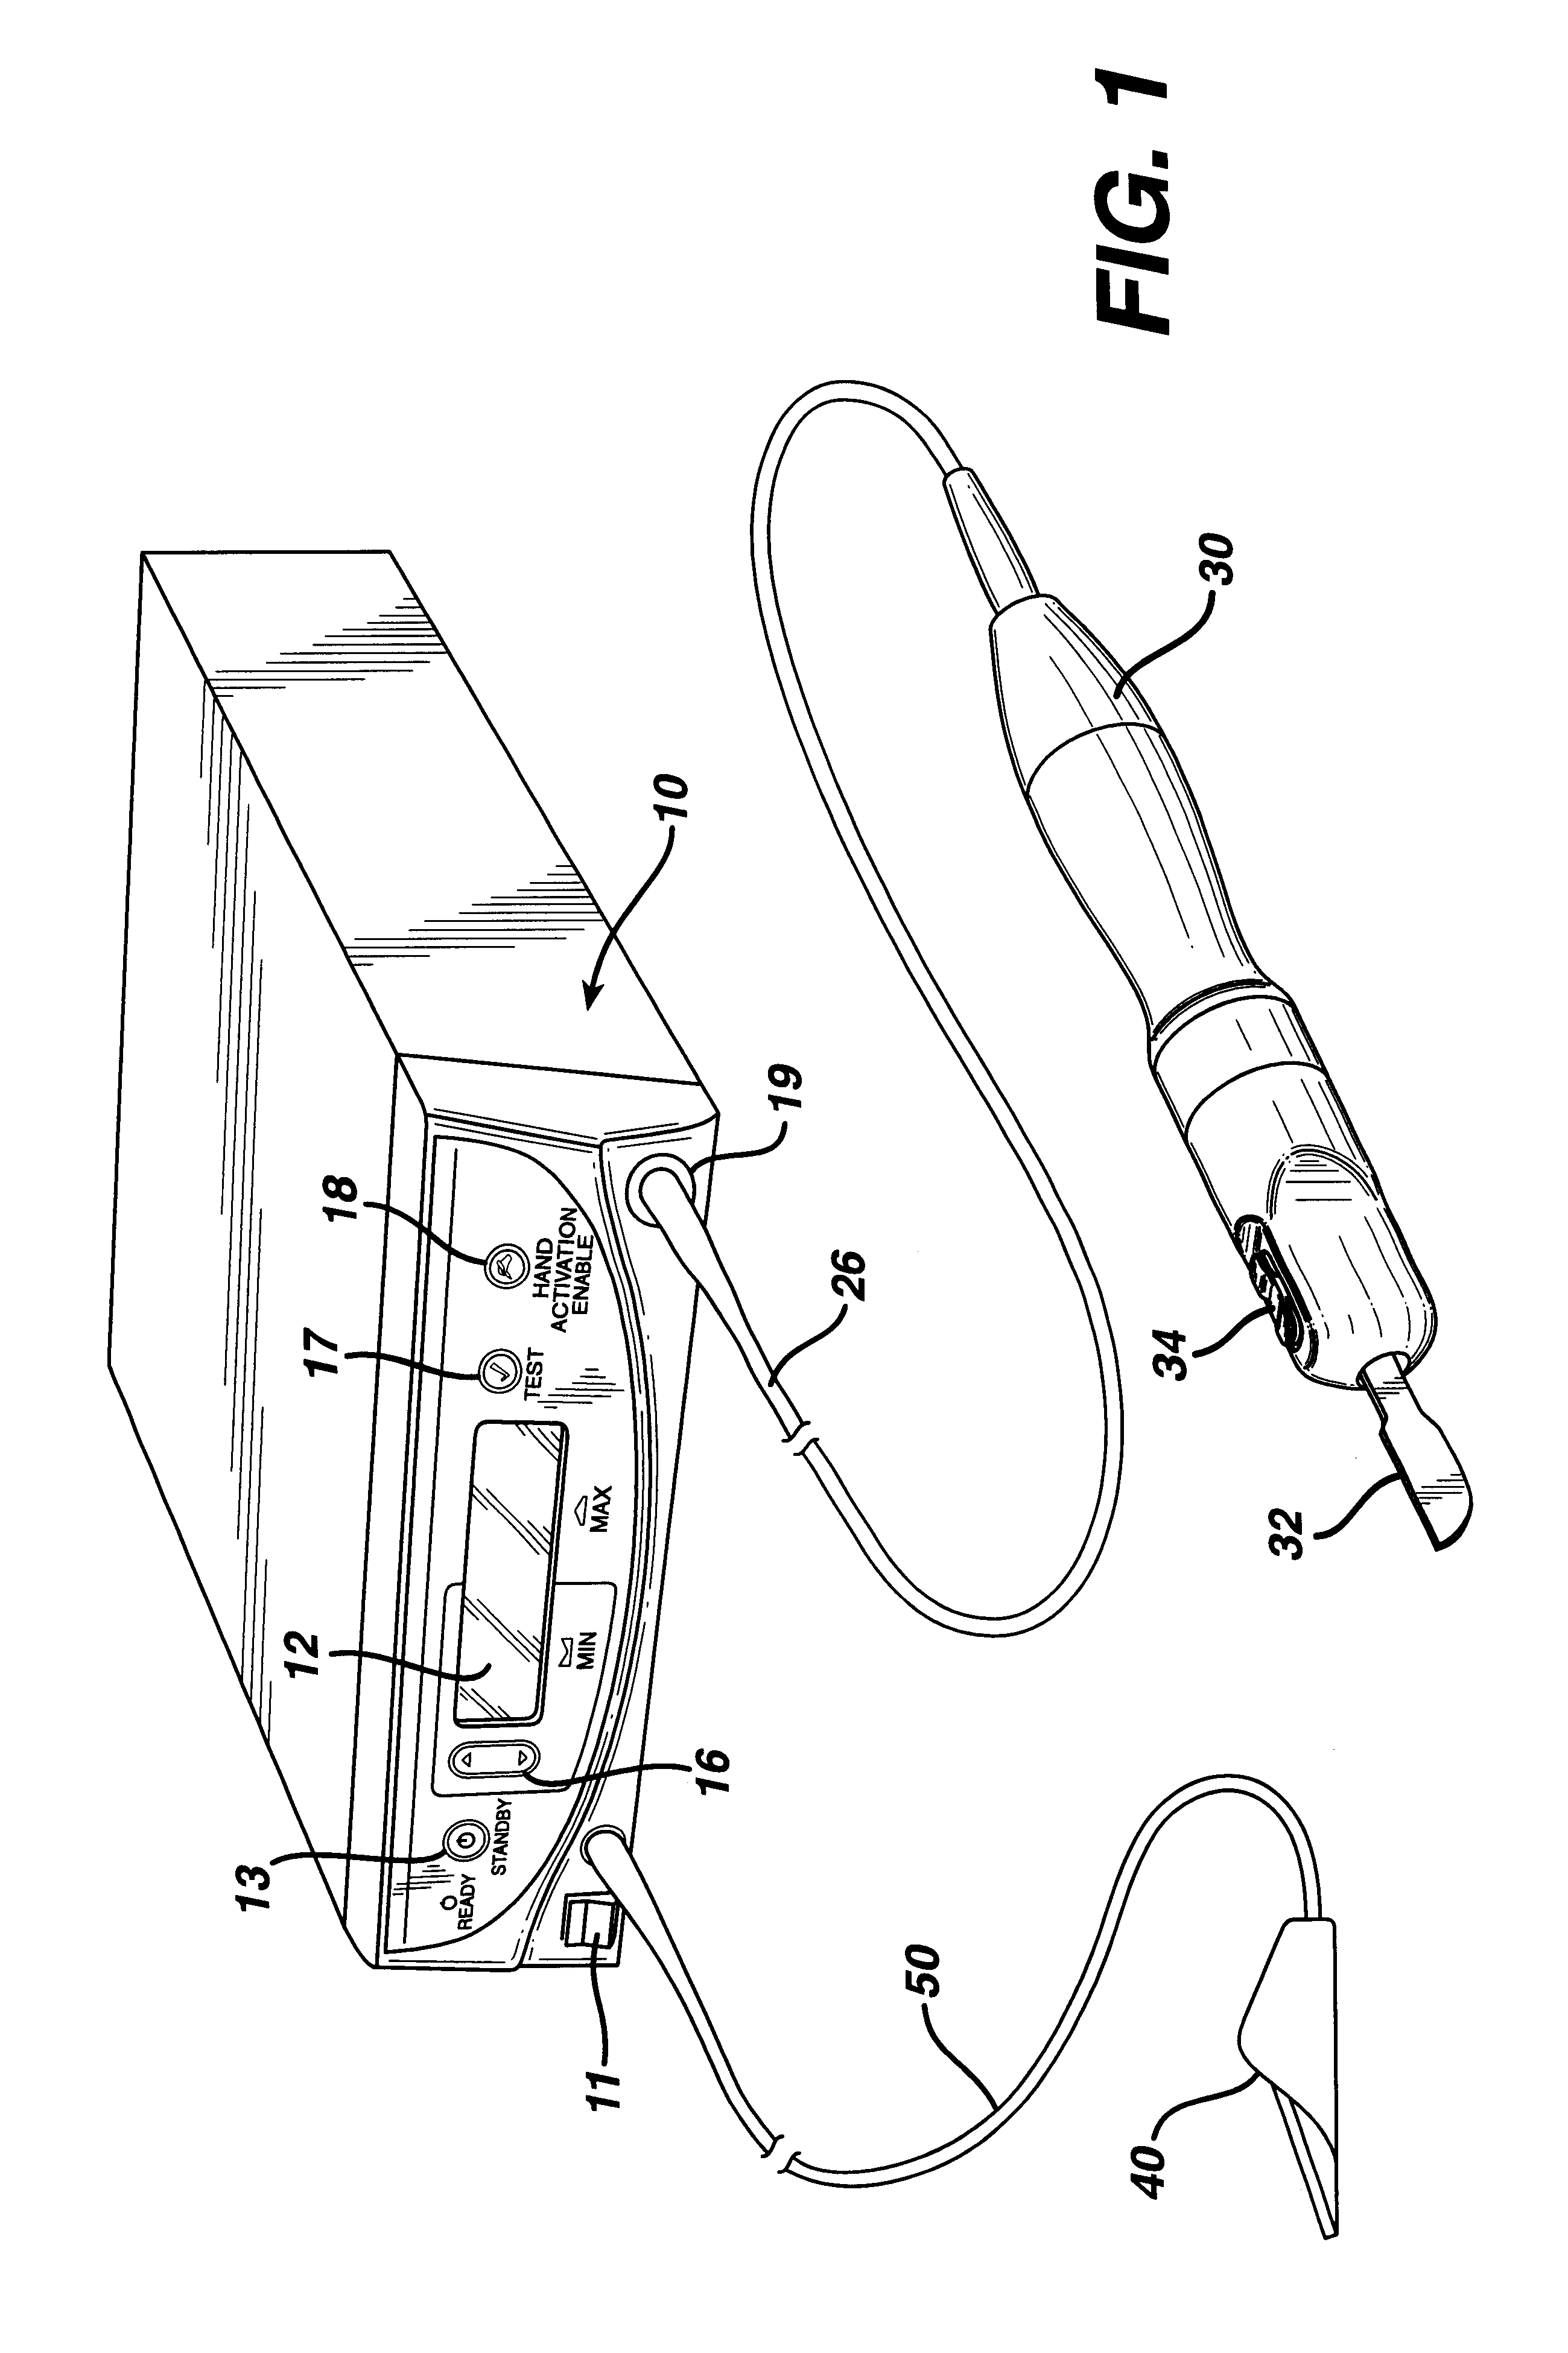 Apparatus and method for altering generator functions in an ultrasonic surgical system